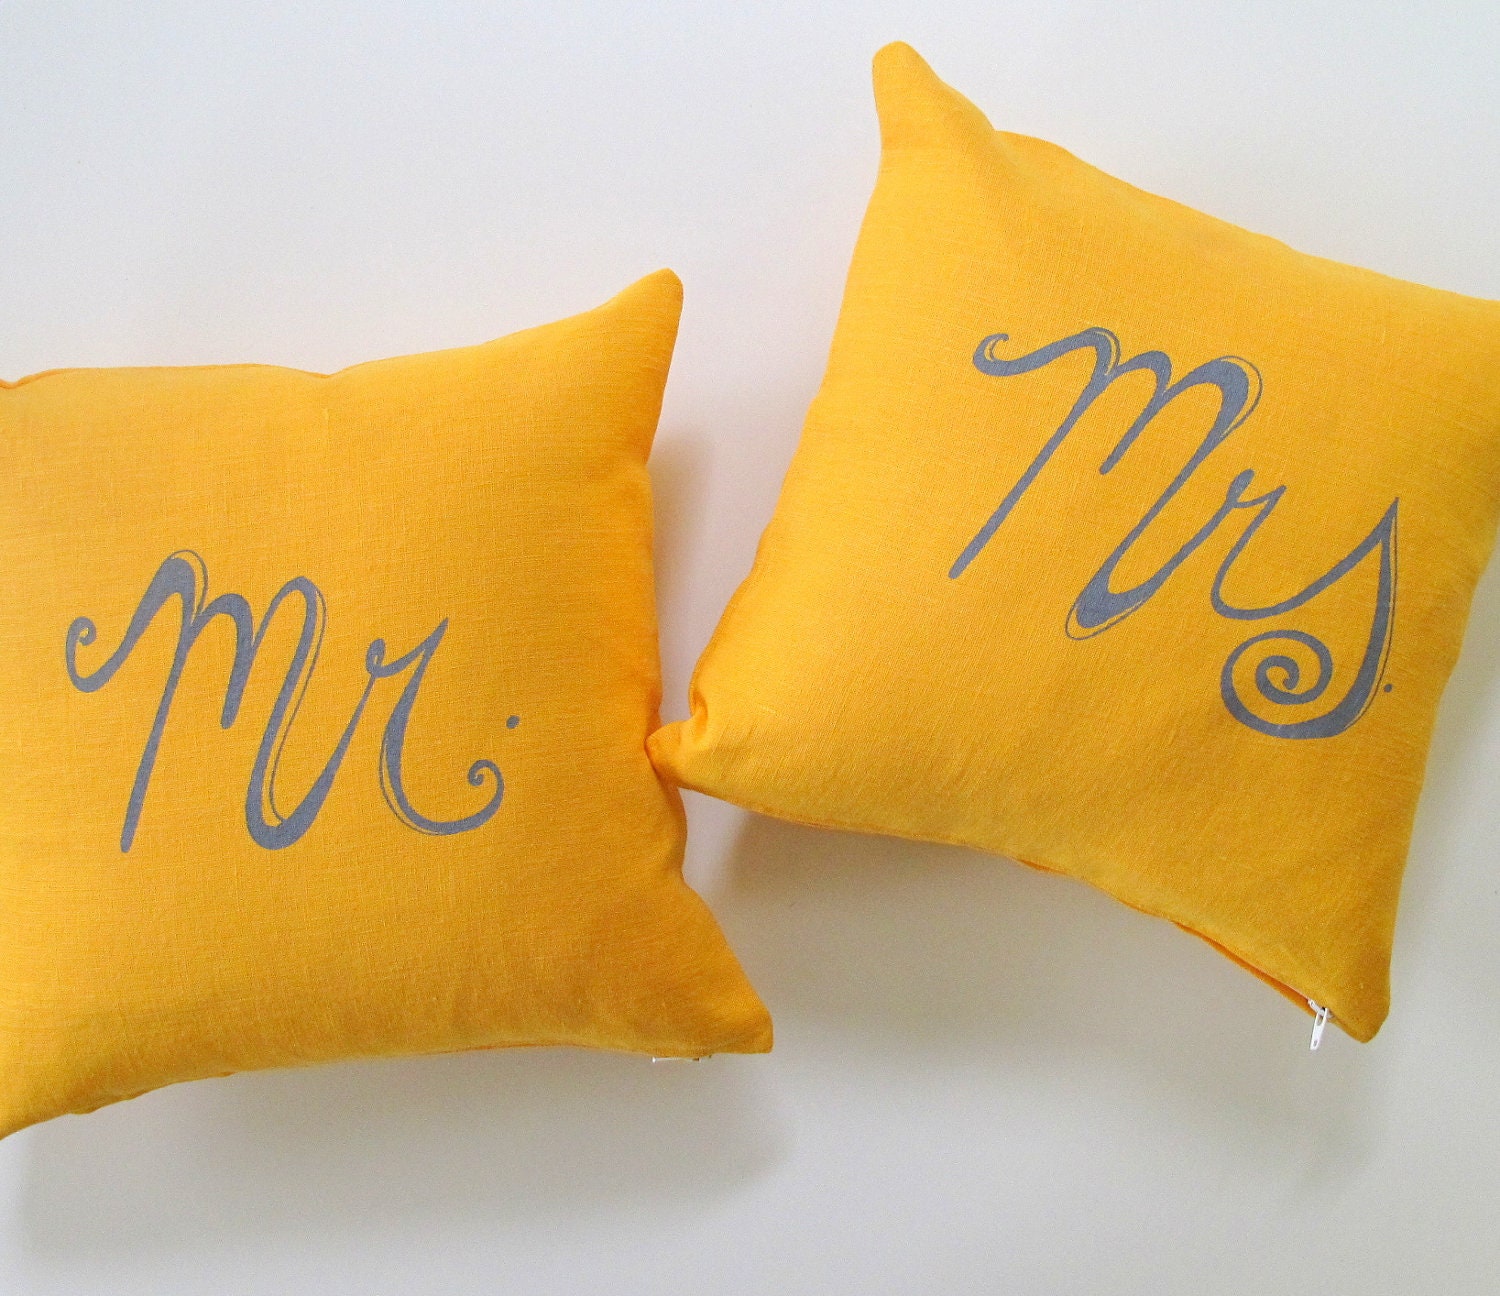 Set of 2 Decorative Pillow Covers - Mr. and Mrs. - 12 x 12 inches -  Made to order